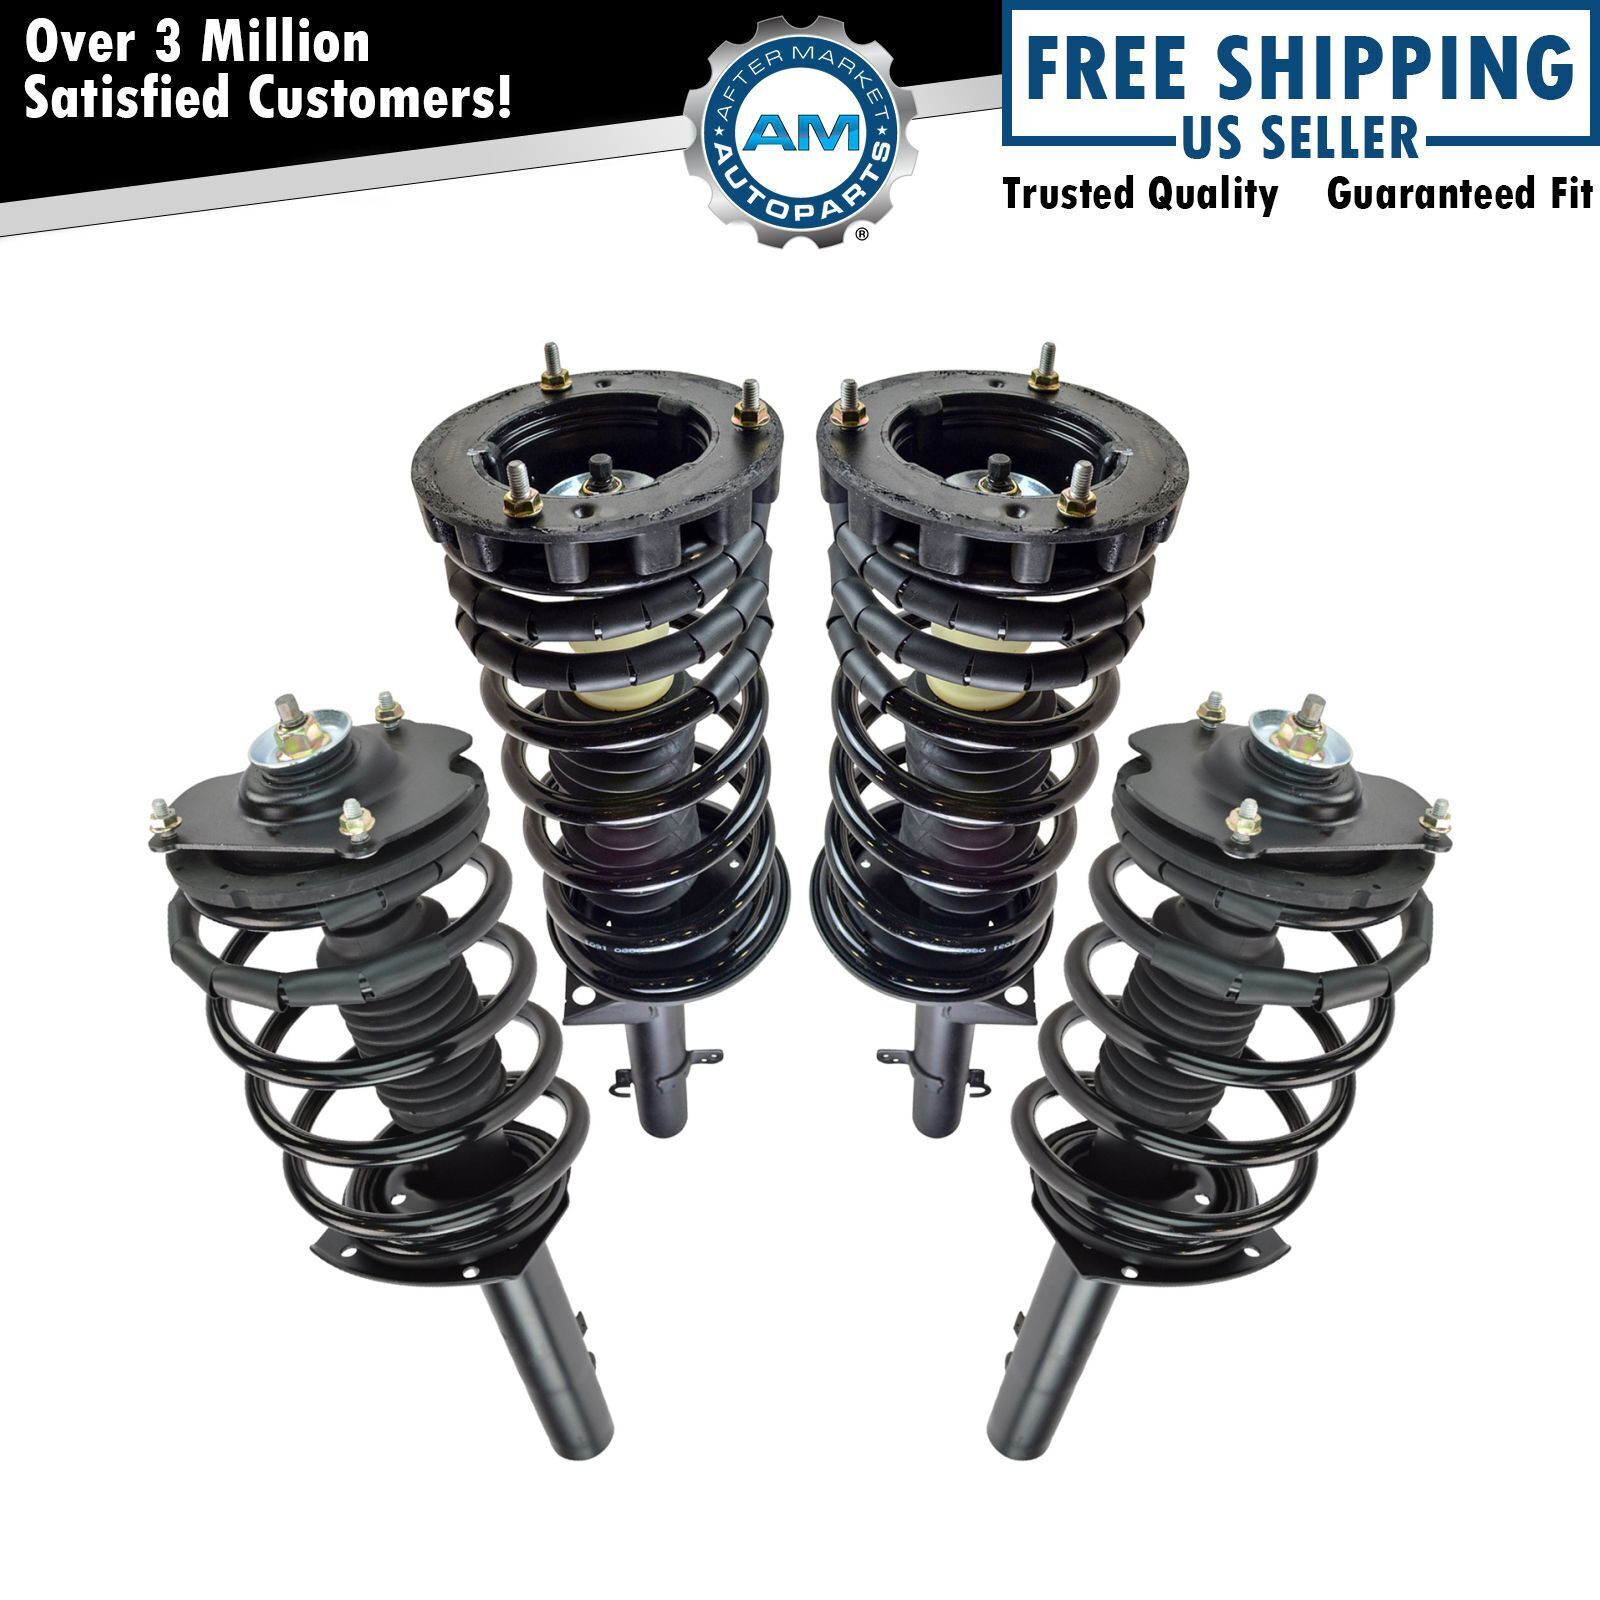 Front & Rear Shock Absorber Strut Kit Set of 4 for Ford Taurus Mercury Sable